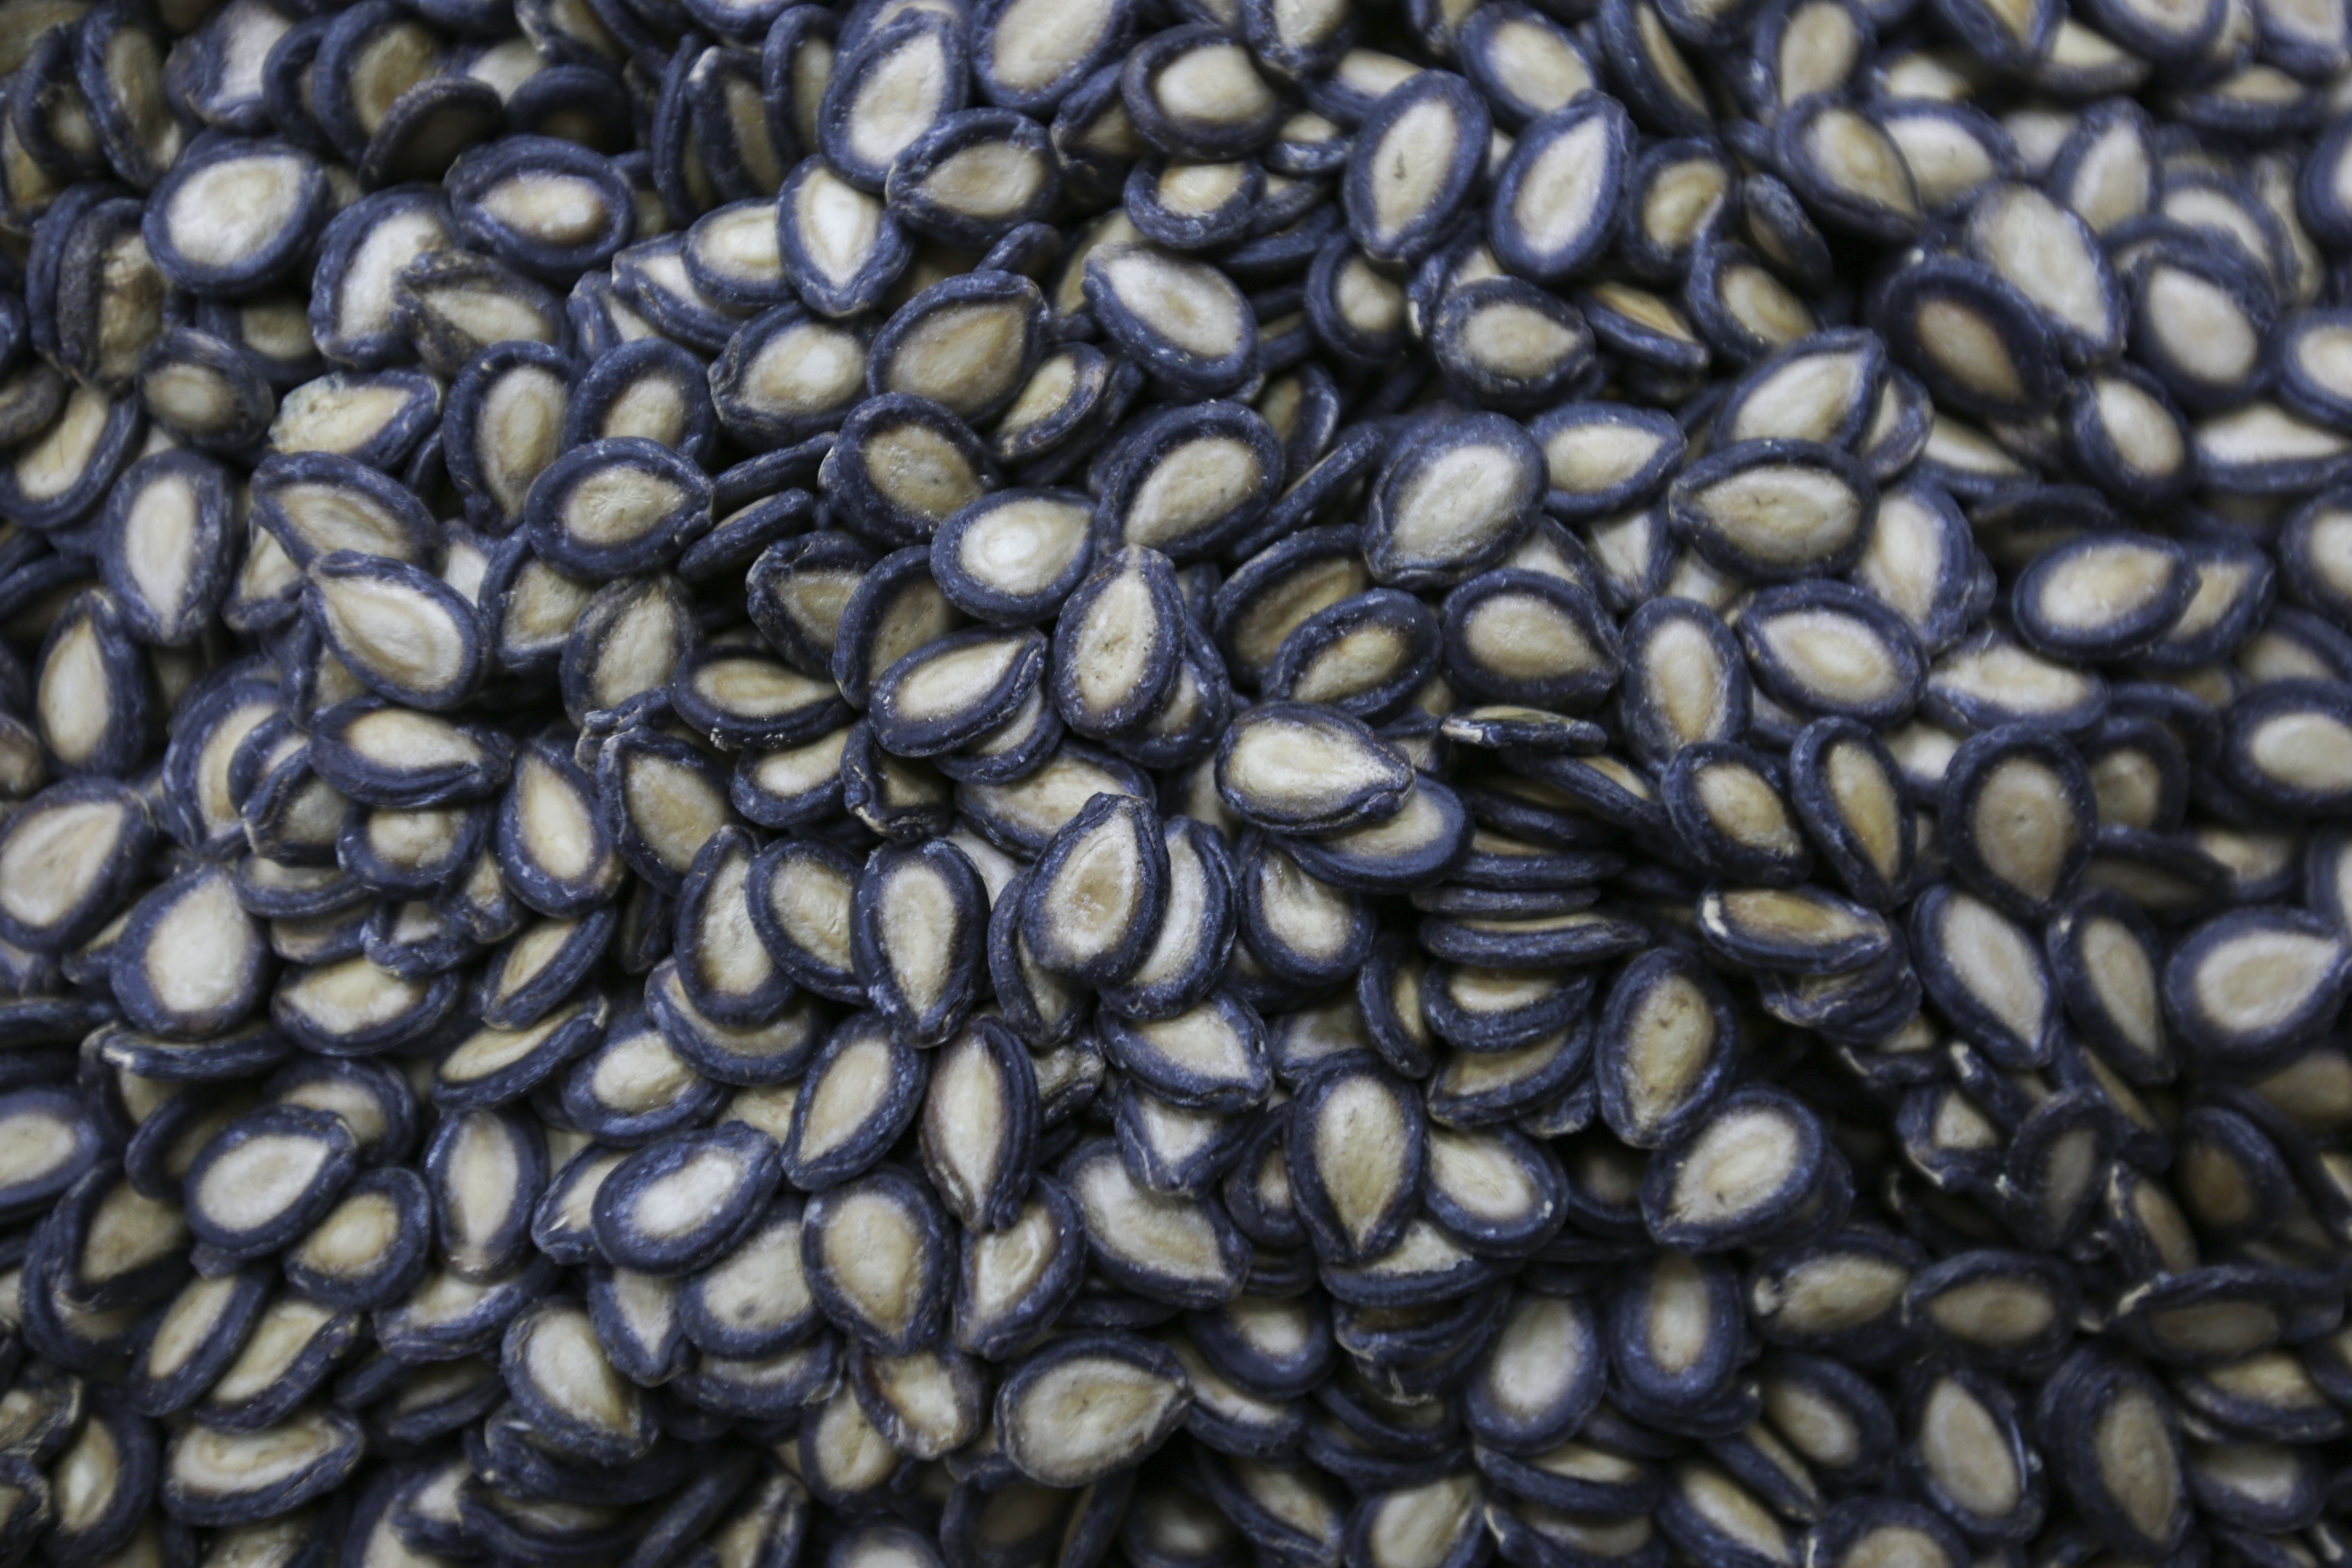 Shanghai Luk’s Dynasty of Melon Seeds maintains a Chinese culinary tradition in changing times